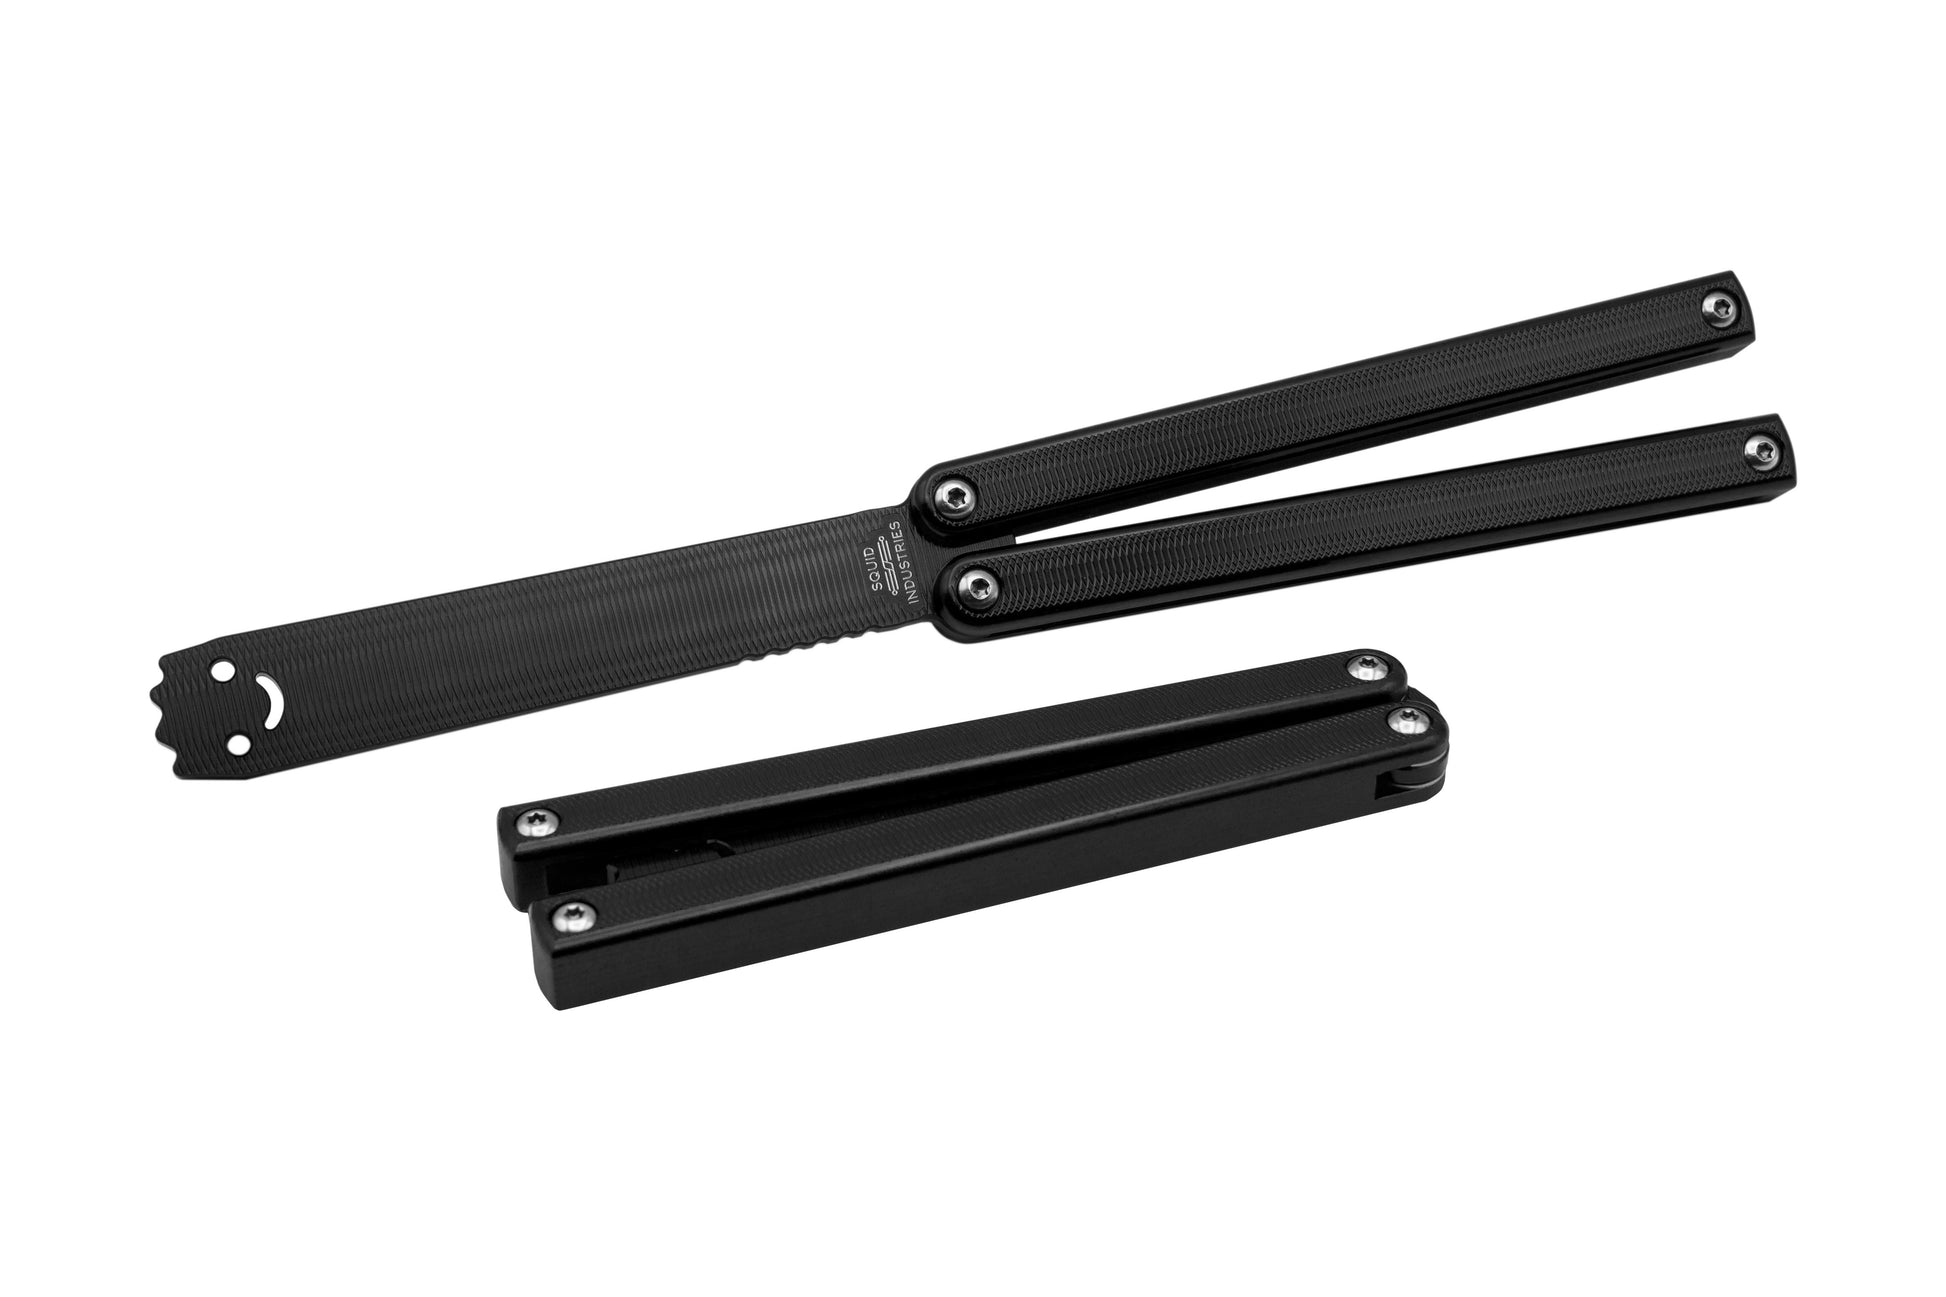 open and closed view of anodized black squiddy-al aluminum balisong butteryfly knife trainer